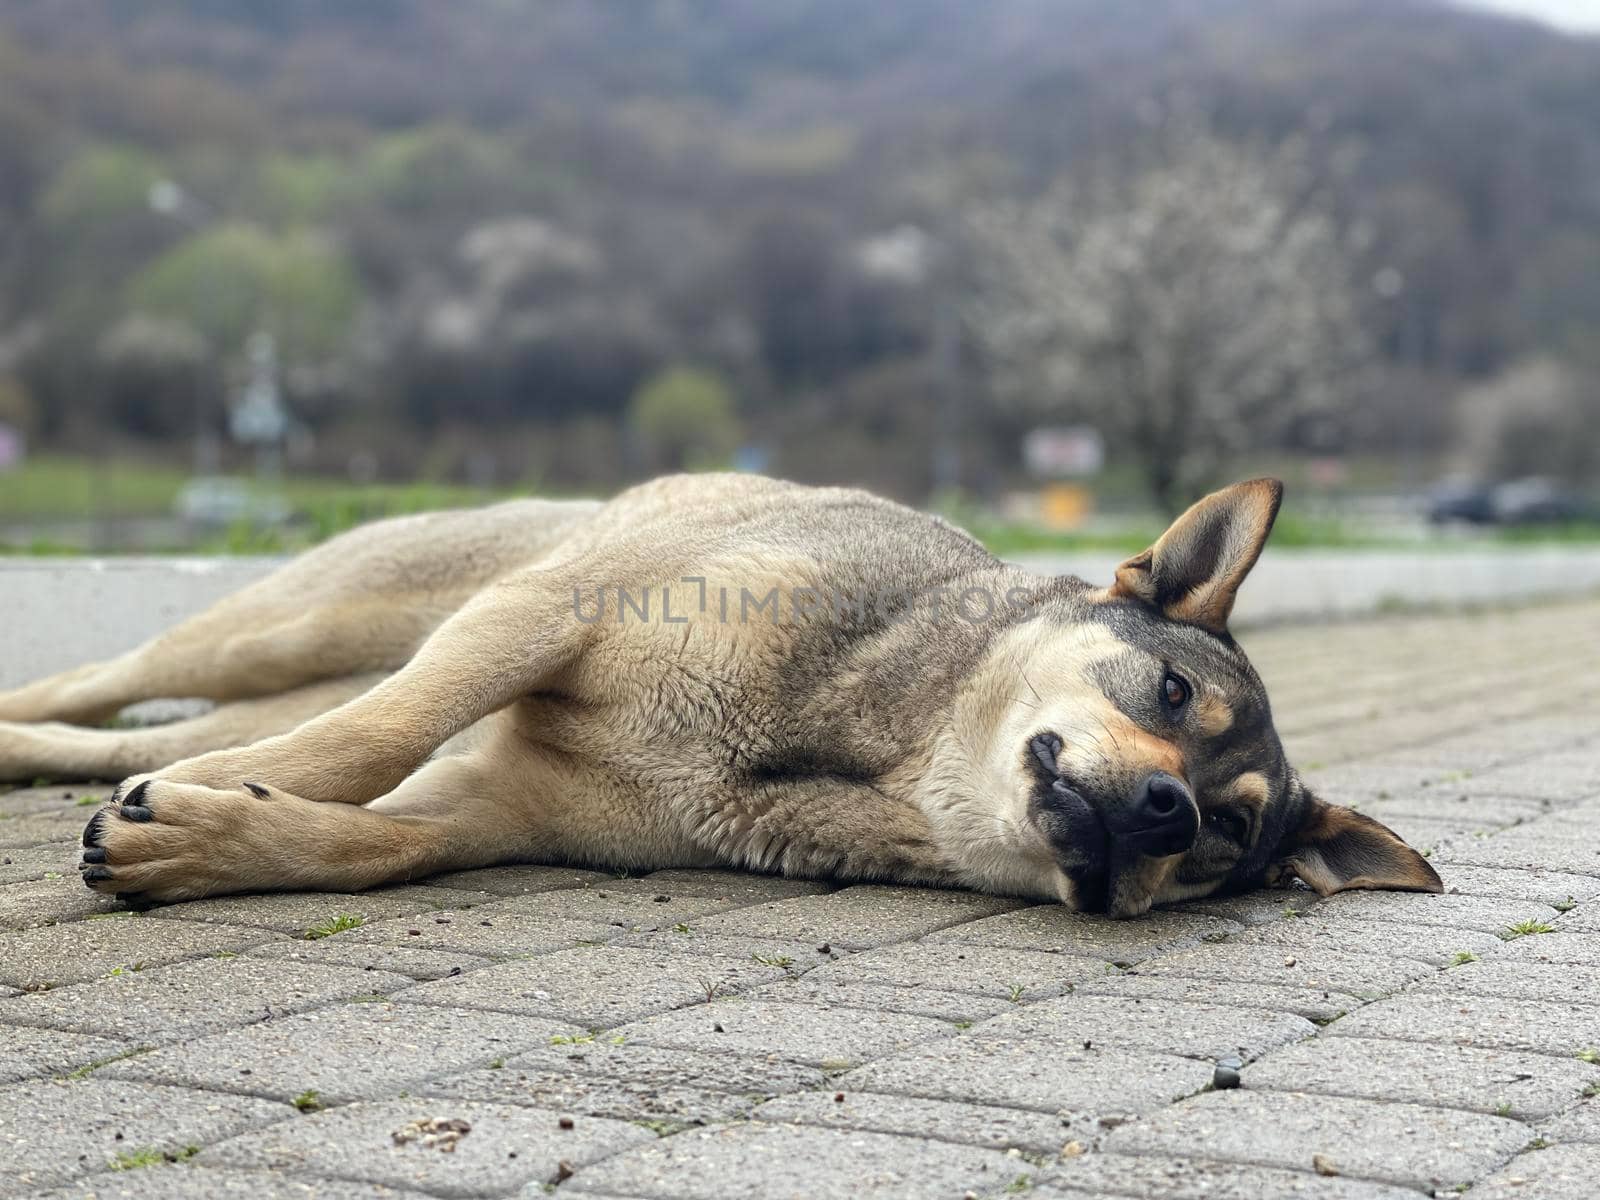 Close up of big dog lying on sidewalk. Cute domestic animal resting and looking away. by epidemiks